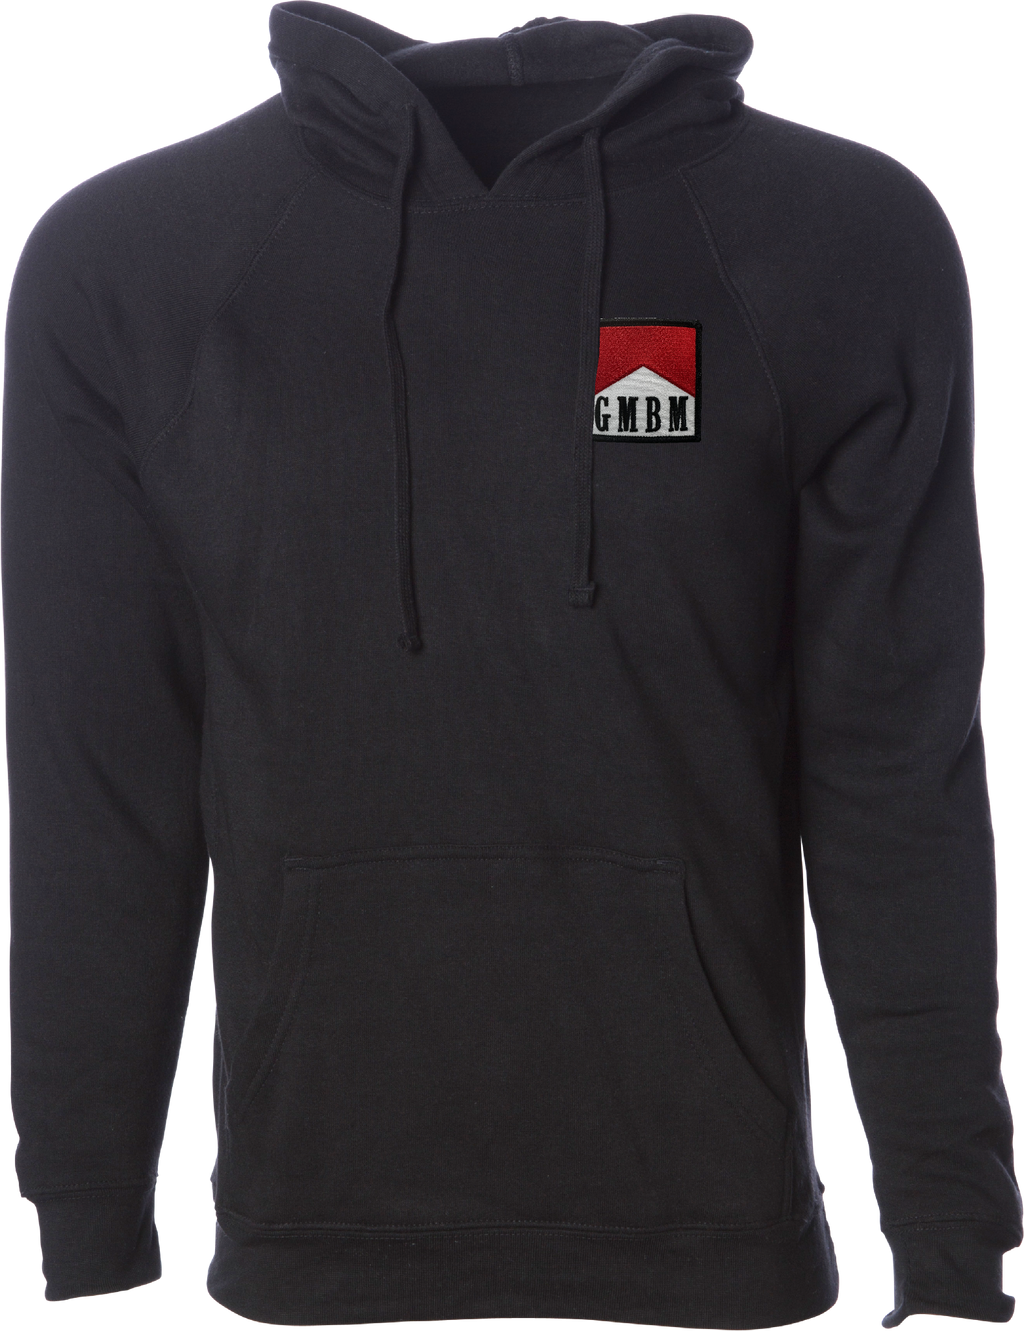 GMBM UNDER THE RADAR SMOKE THE COMPETITION HOODIE